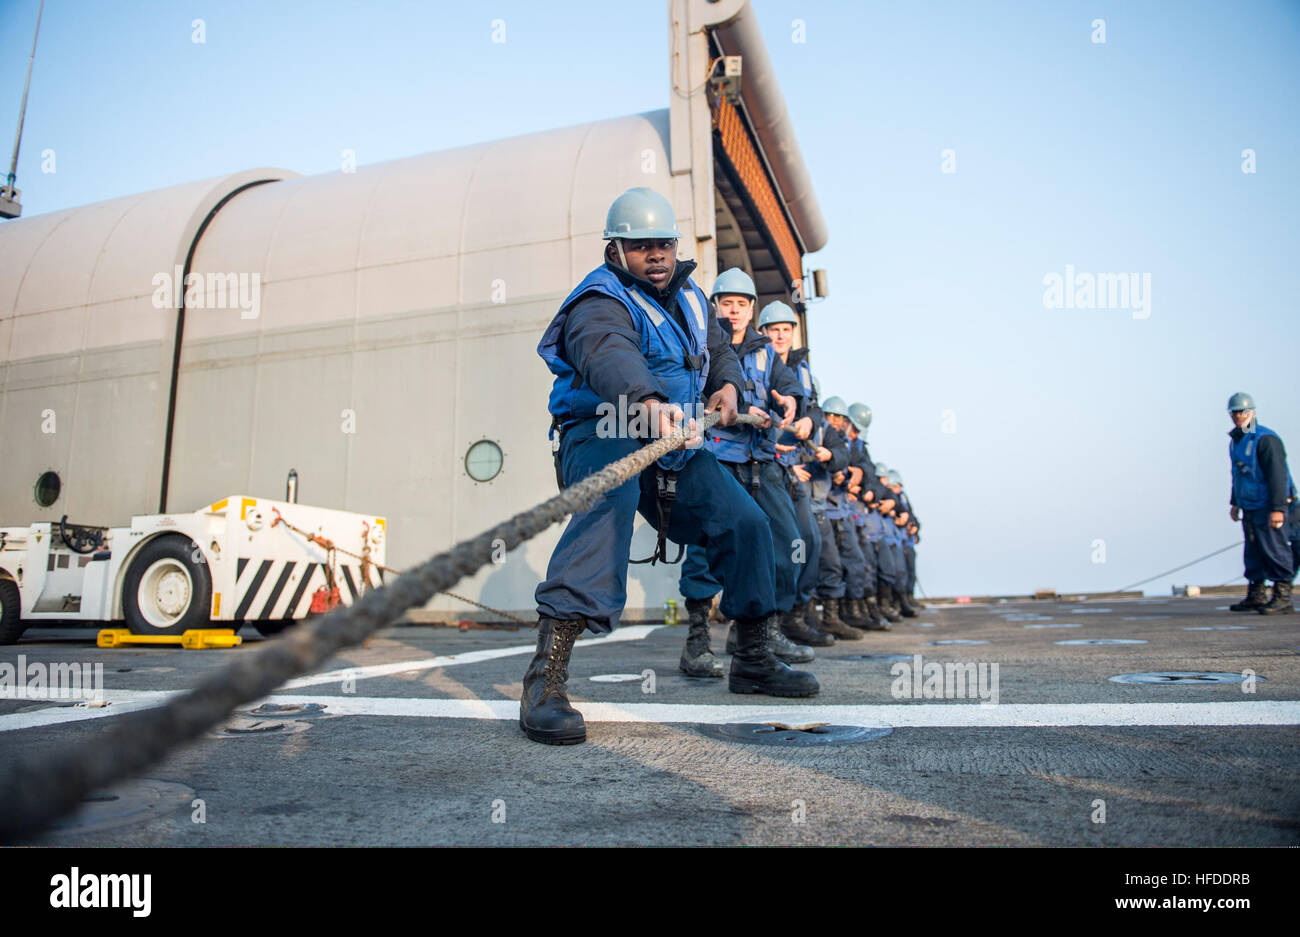 U.S. Sailors assigned to the amphibious transport dock ship USS Denver (LPD 9) tow a line while conducting a replenishment at sea with the fleet replenishment oiler USNS Rappahannock (T-AO 204) in the East China Sea March 27, 2014. The Denver was part of the Bonhomme Richard Amphibious Ready Group and was participating in exercise Ssang Yong 14, a combined U.S.-South Korean combat readiness and joint/combined interoperability exercise designed to advance South Korean command and control capabilities through amphibious operations. (U.S. Navy photo by Mass Communication Specialist 3rd Class Todd Stock Photo